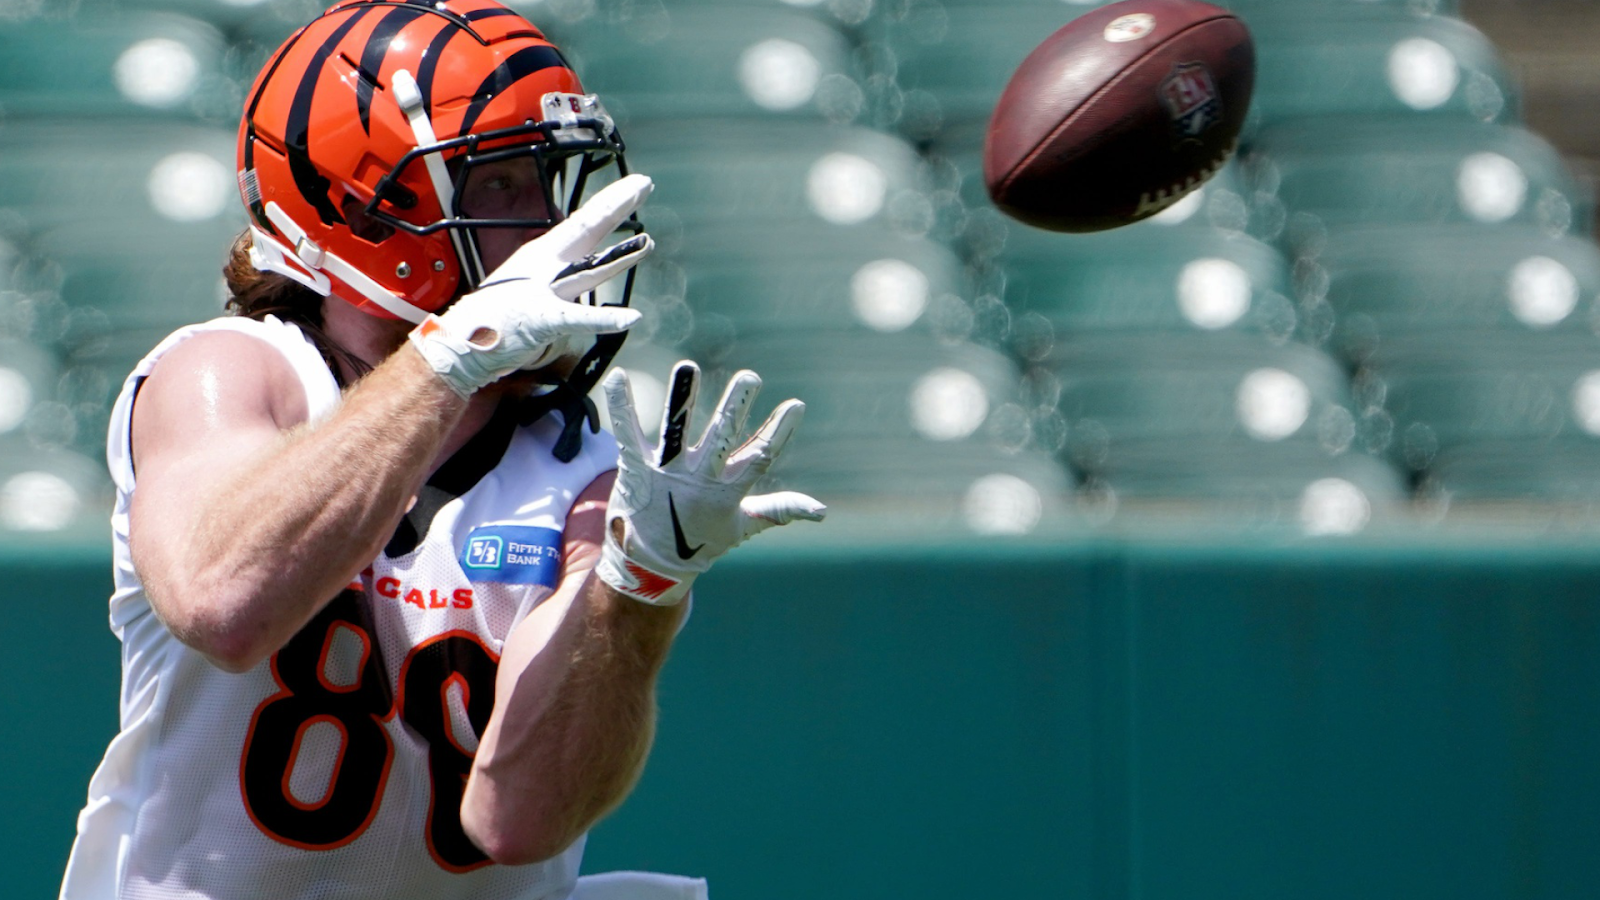 NFL Week 2 DFS Preview: What TE’s Should You Invest In?